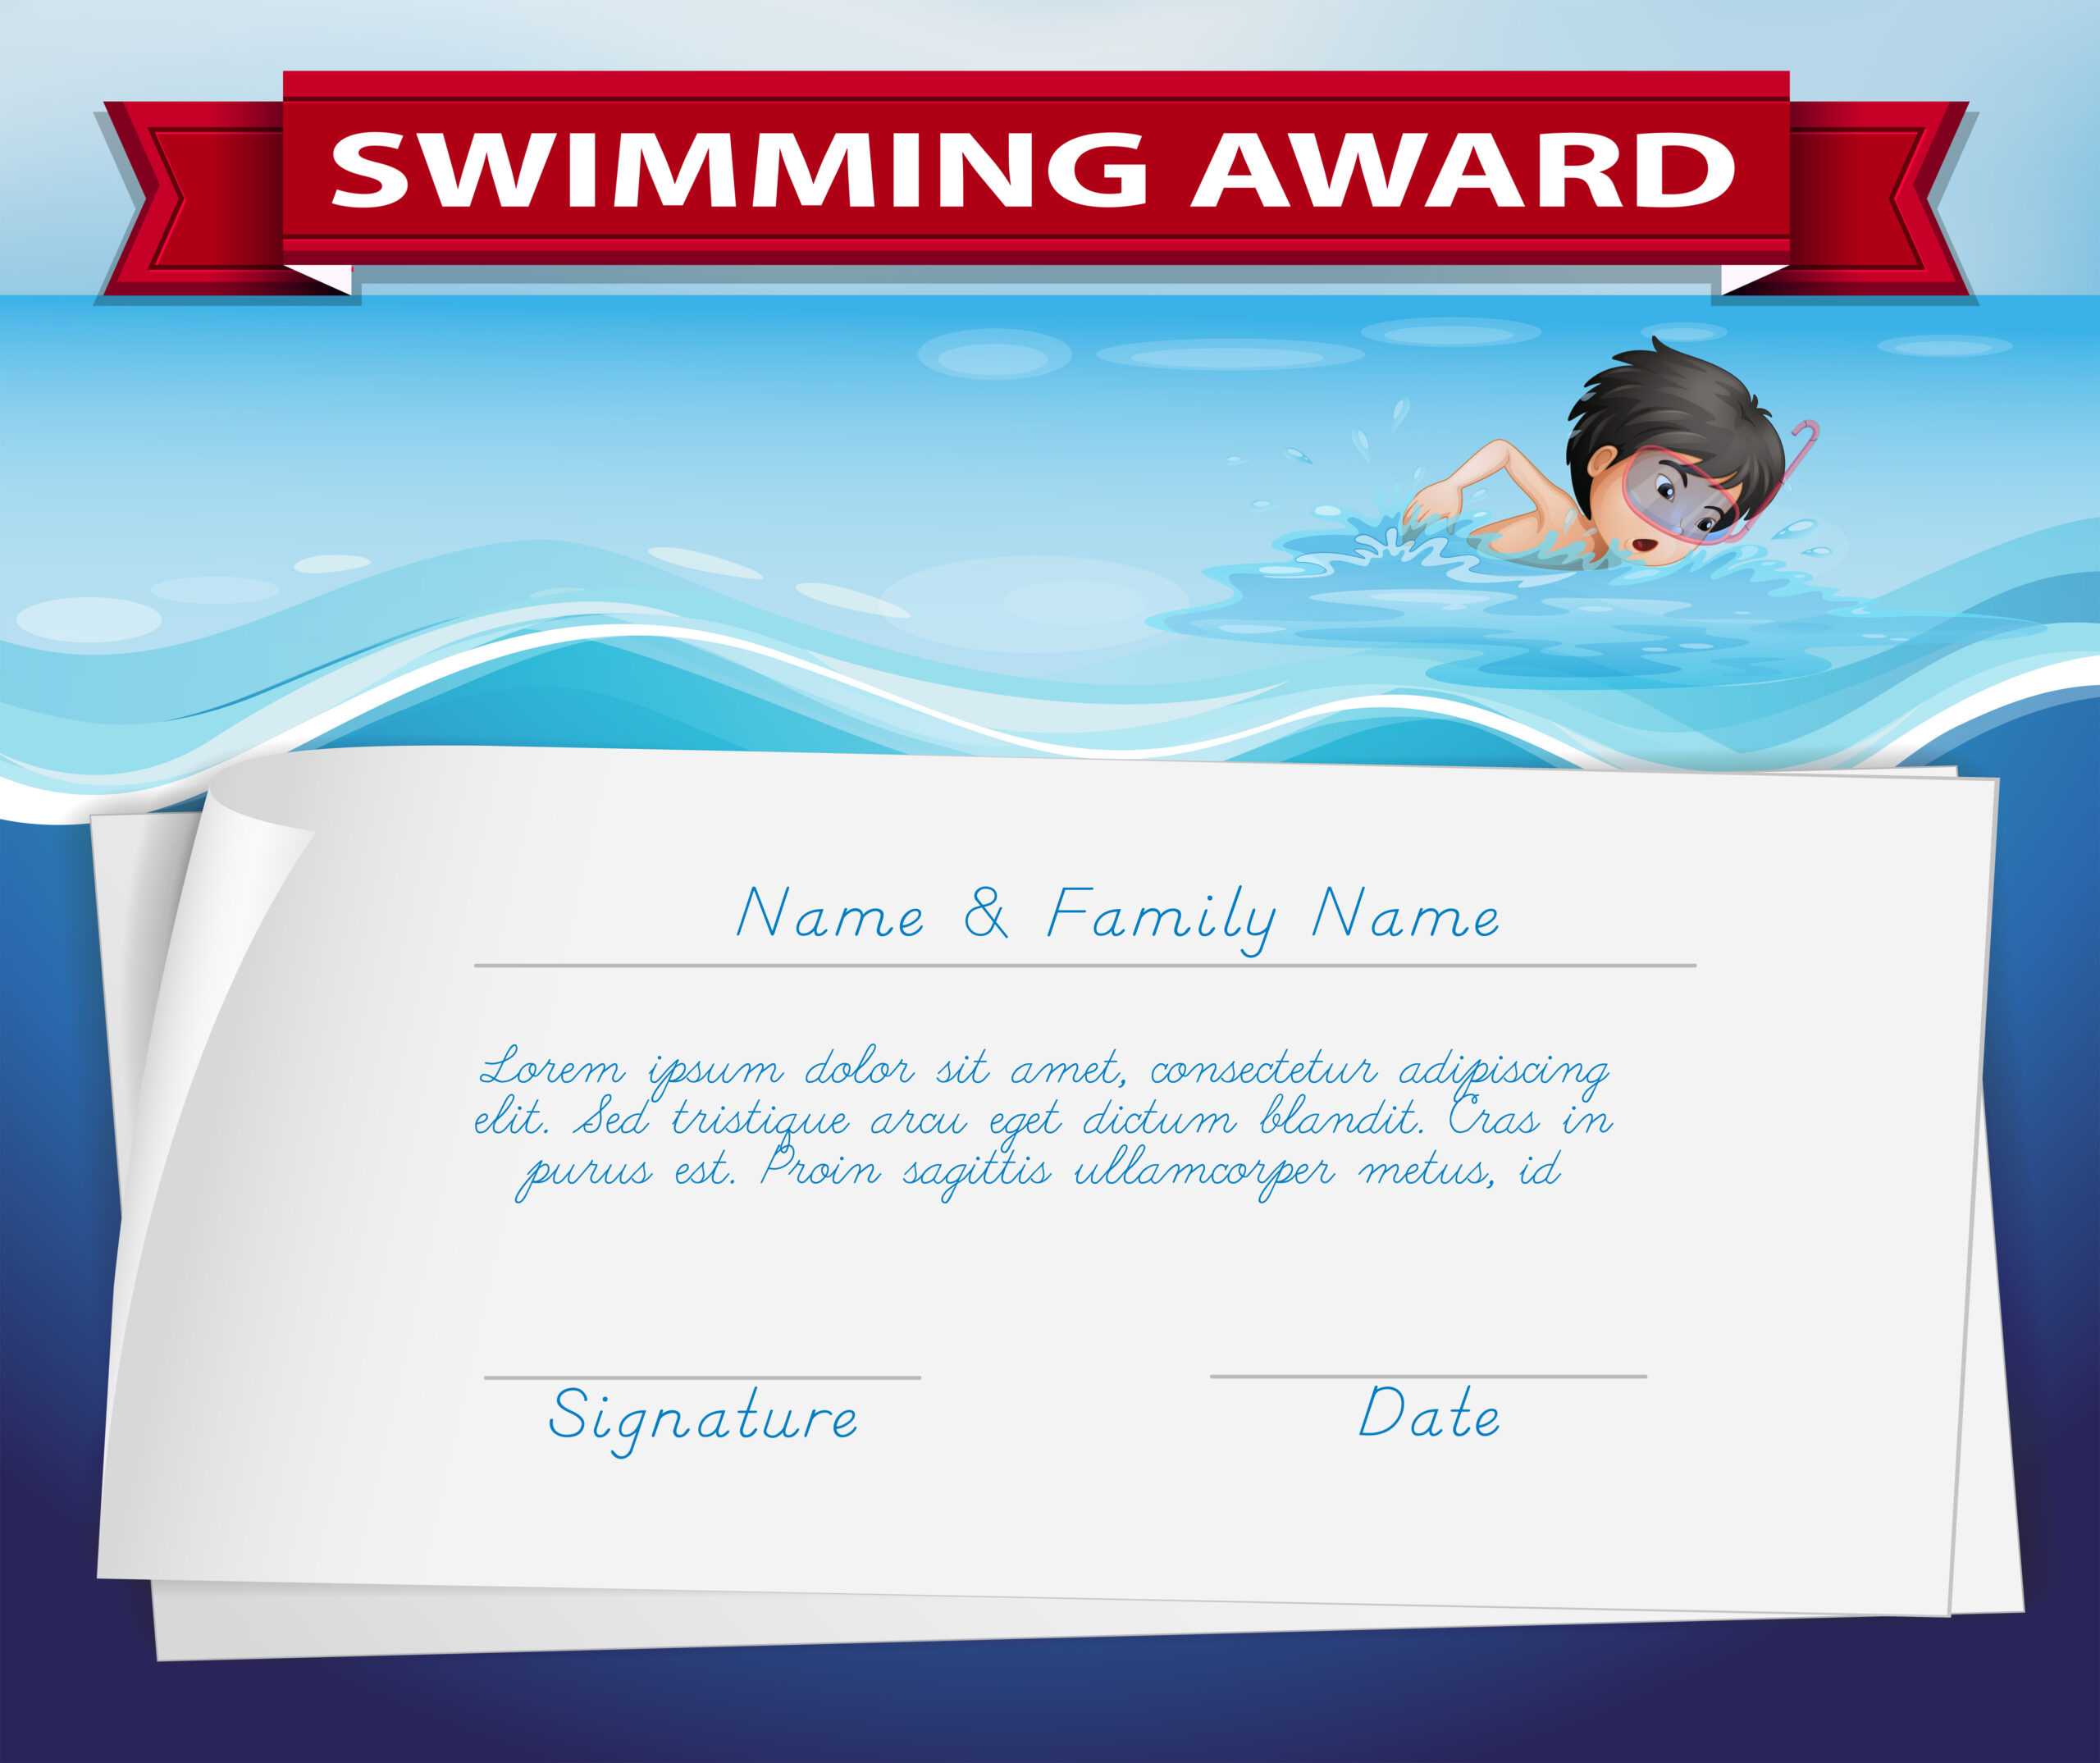 Template Of Certificate For Swimming Award – Download Free Regarding Swimming Certificate Templates Free